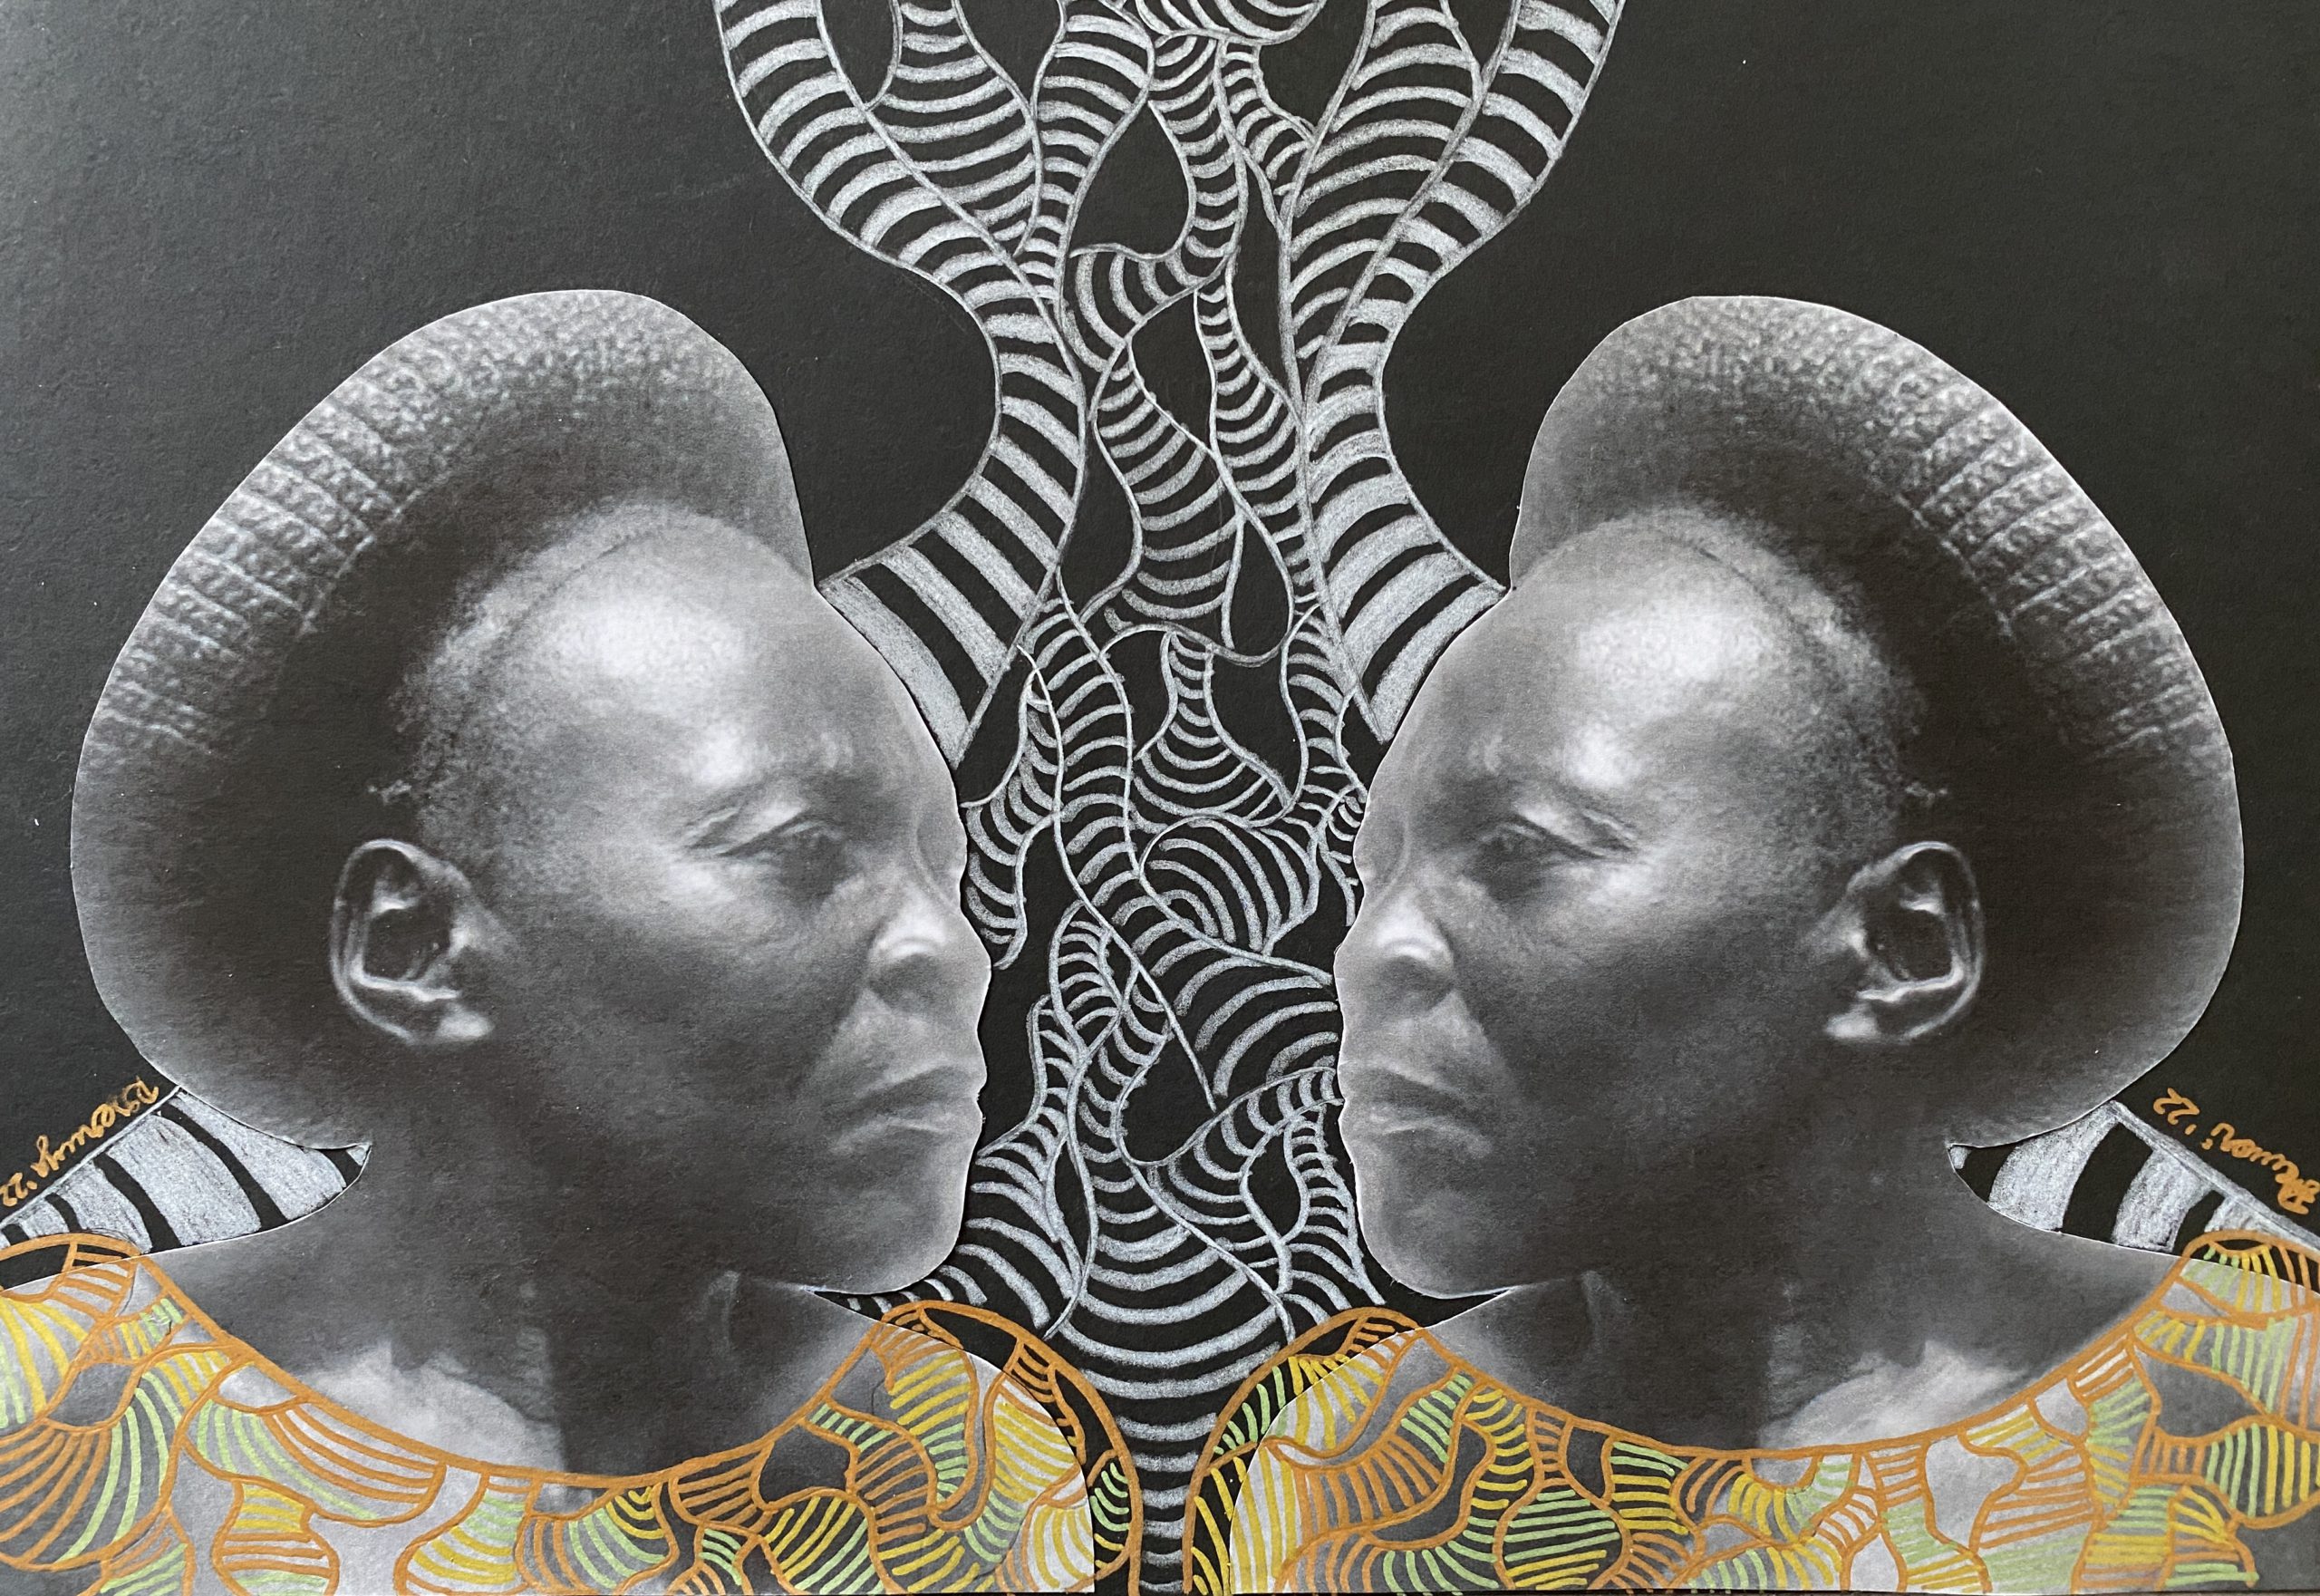 Chapa 10 (Image used: Woman from the Democratic Republic of Congo)